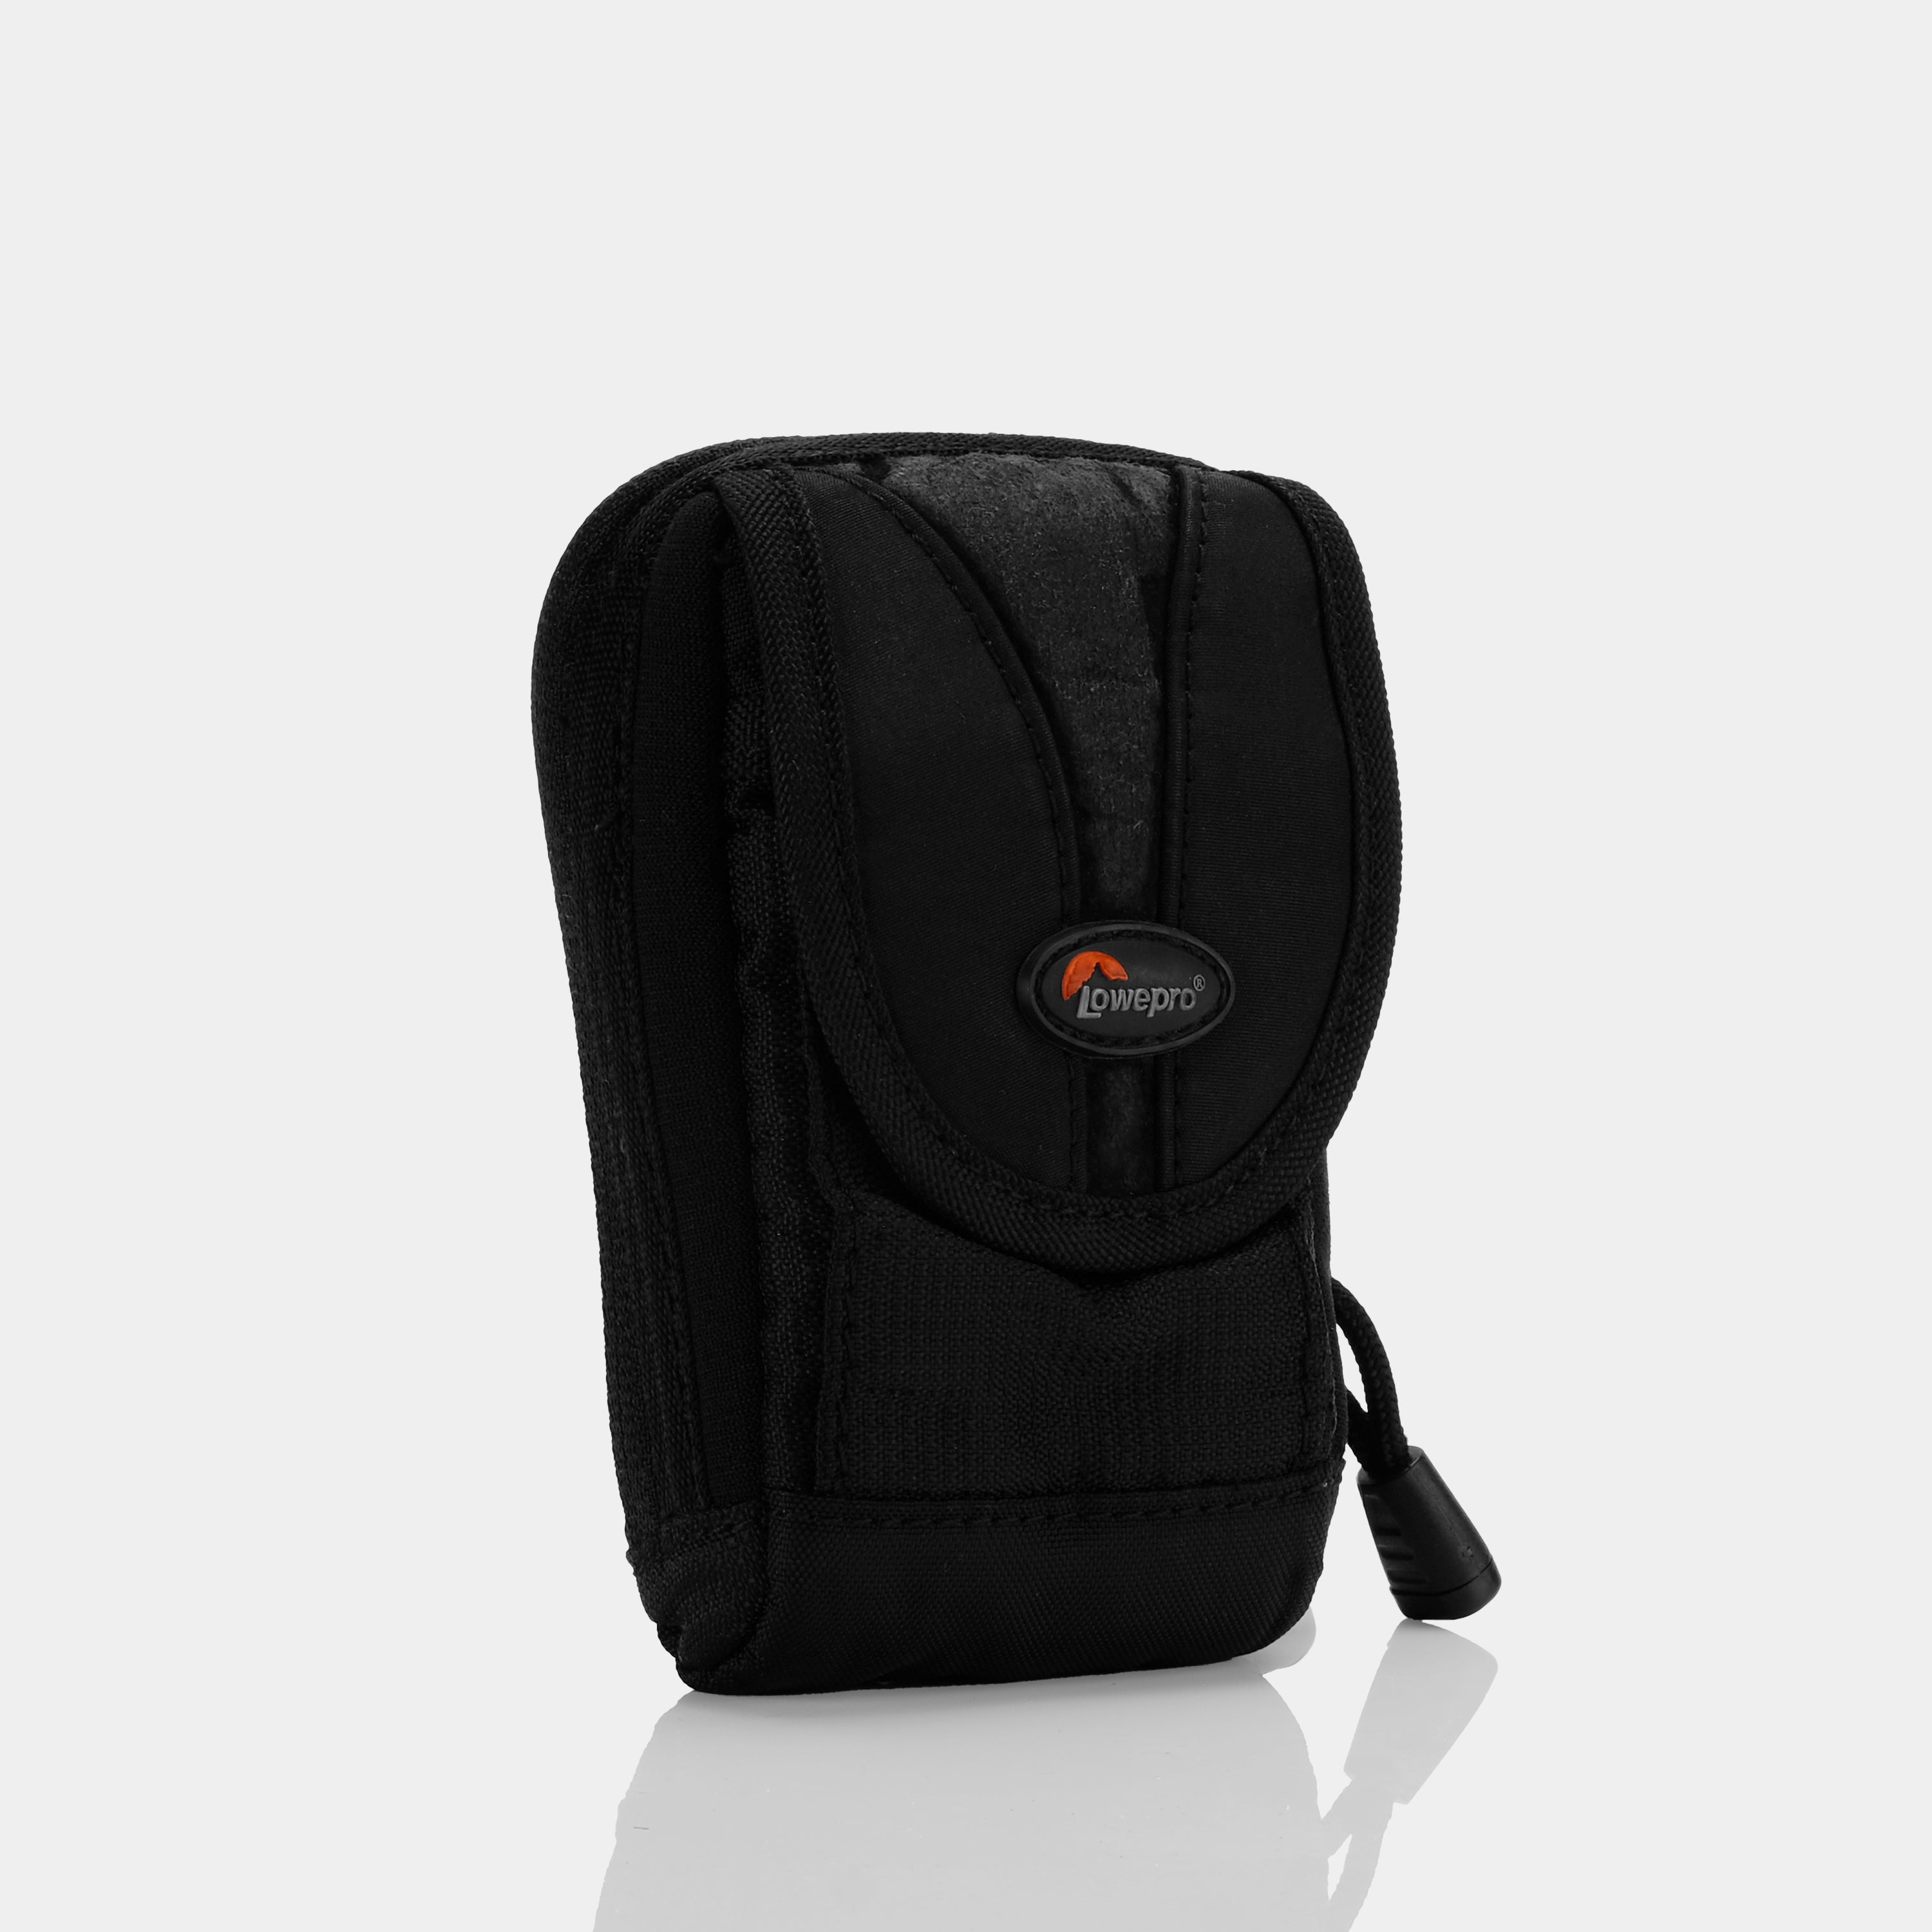 Lowepro Black Point and Shoot Camera Case